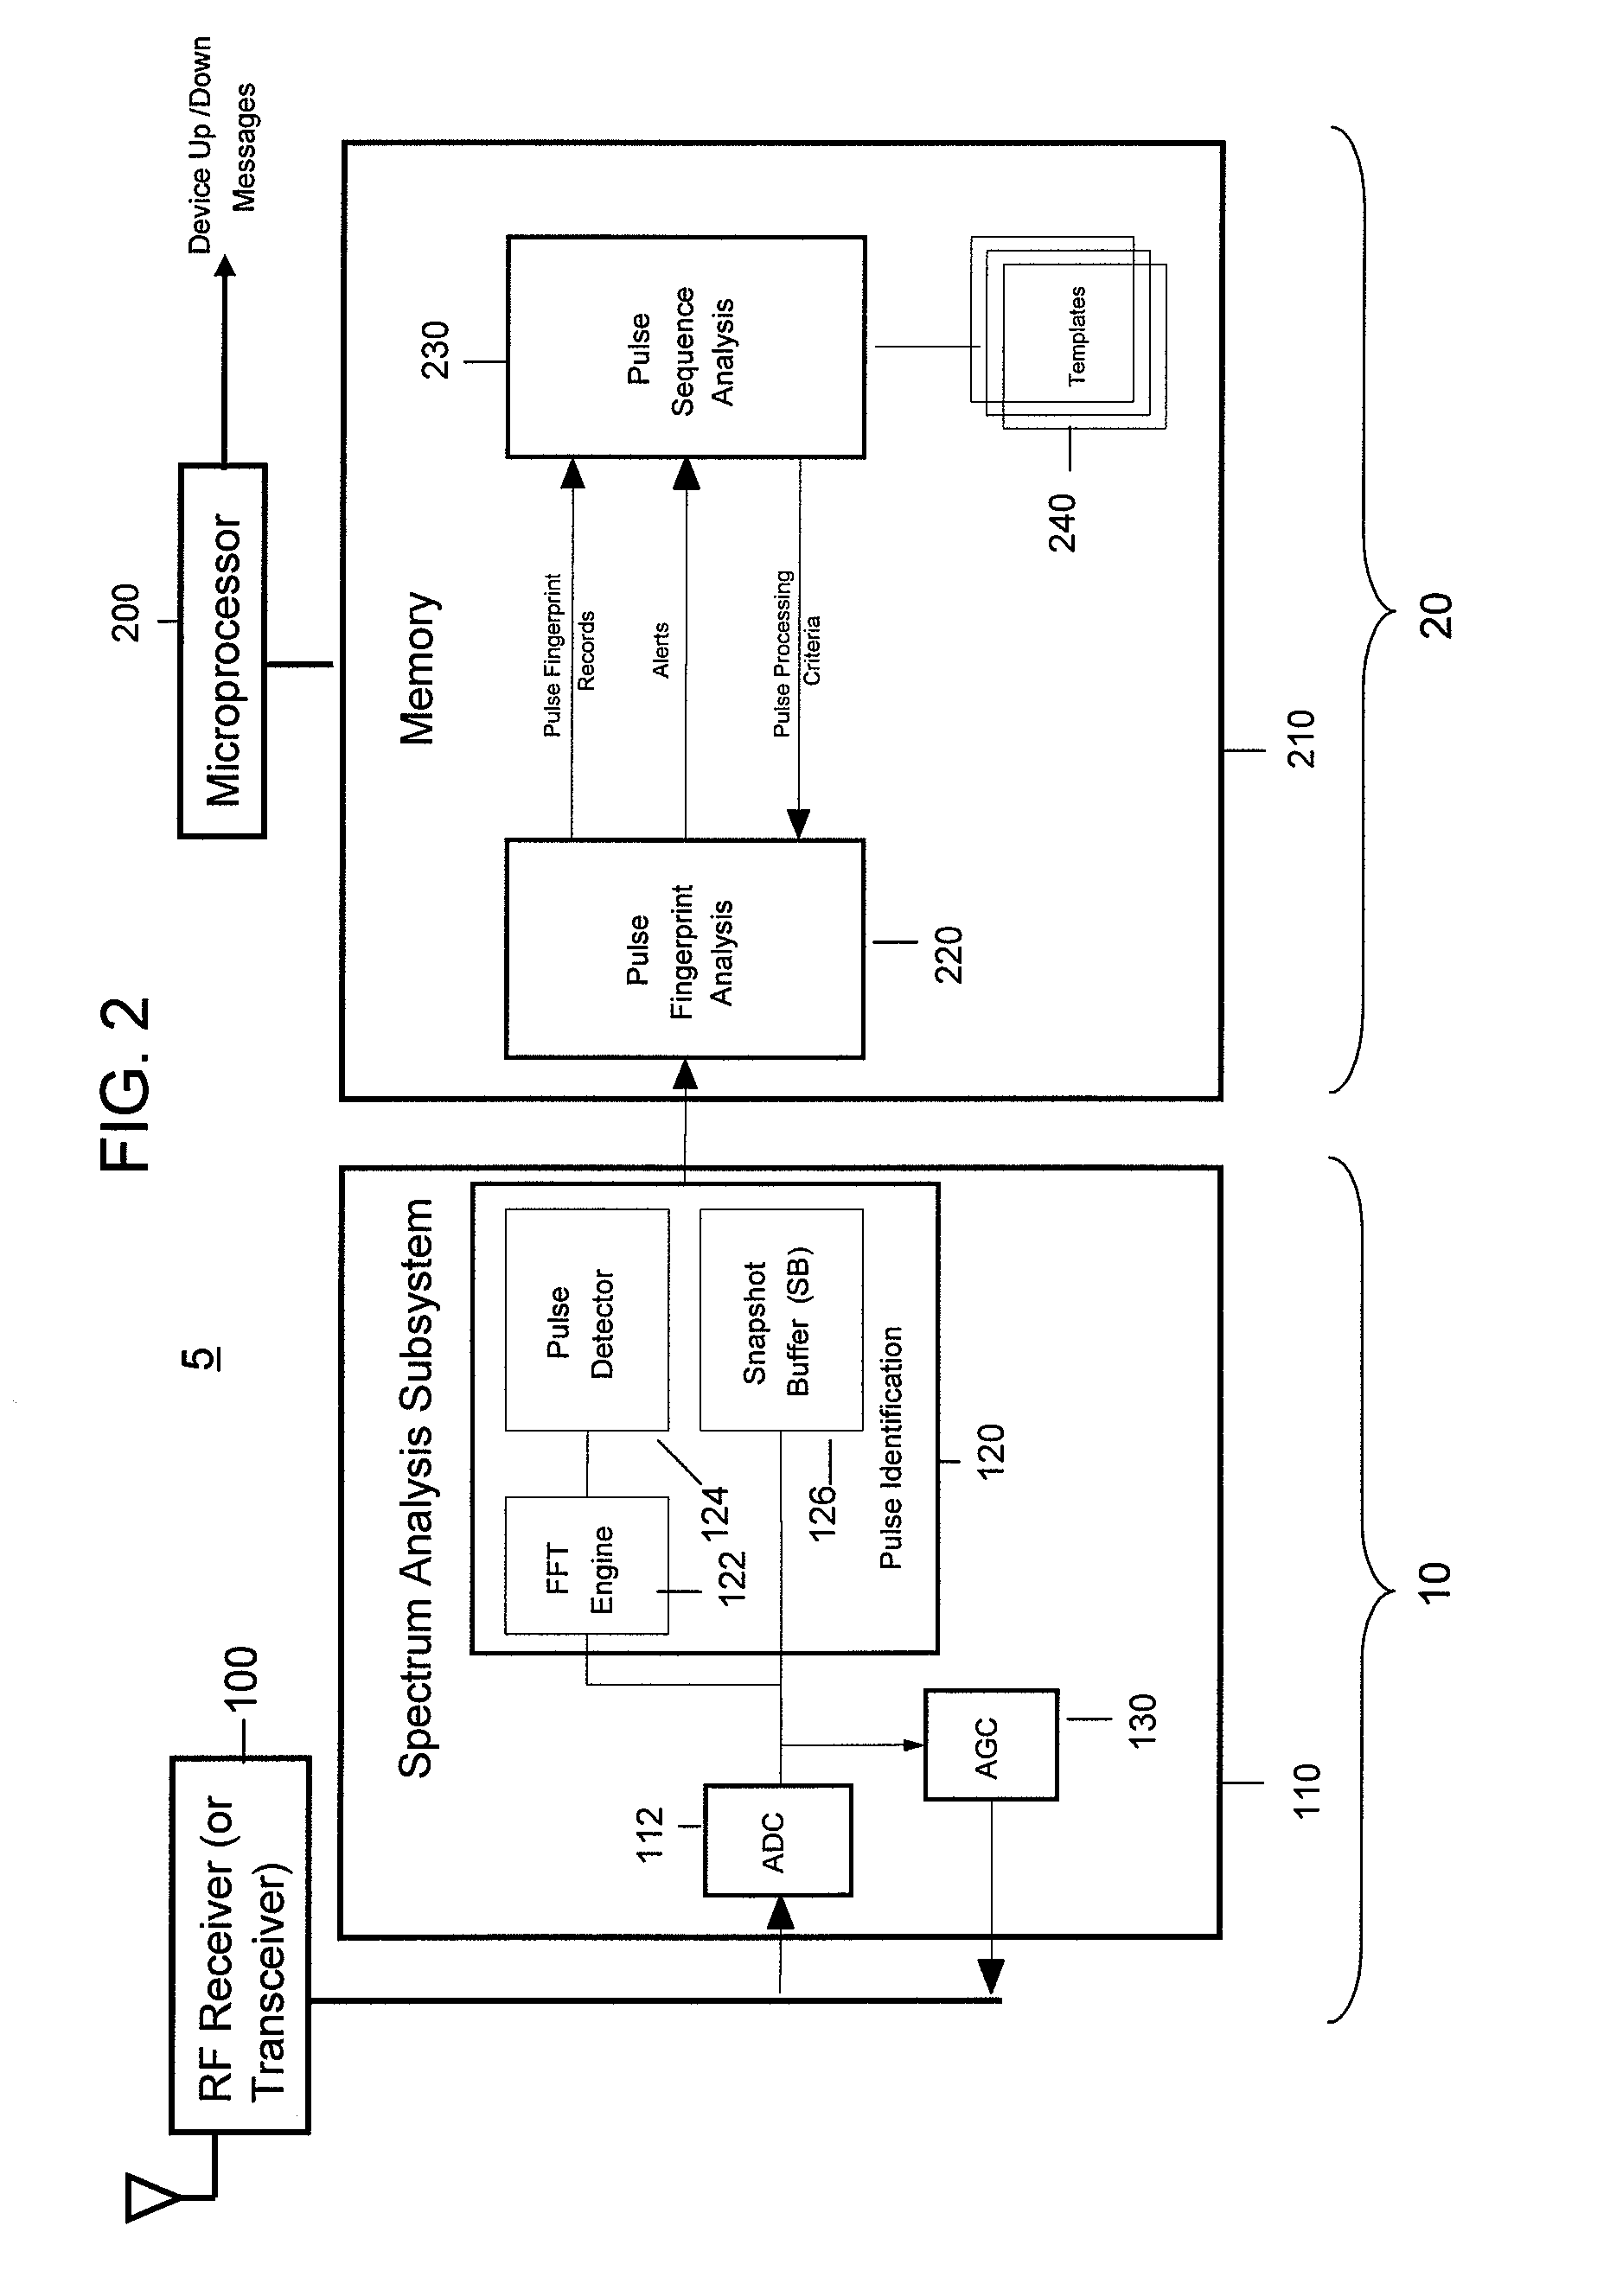 System and Method for Identifying Wireless Devices Using Pulse Fingerprinting and Sequence Analysis